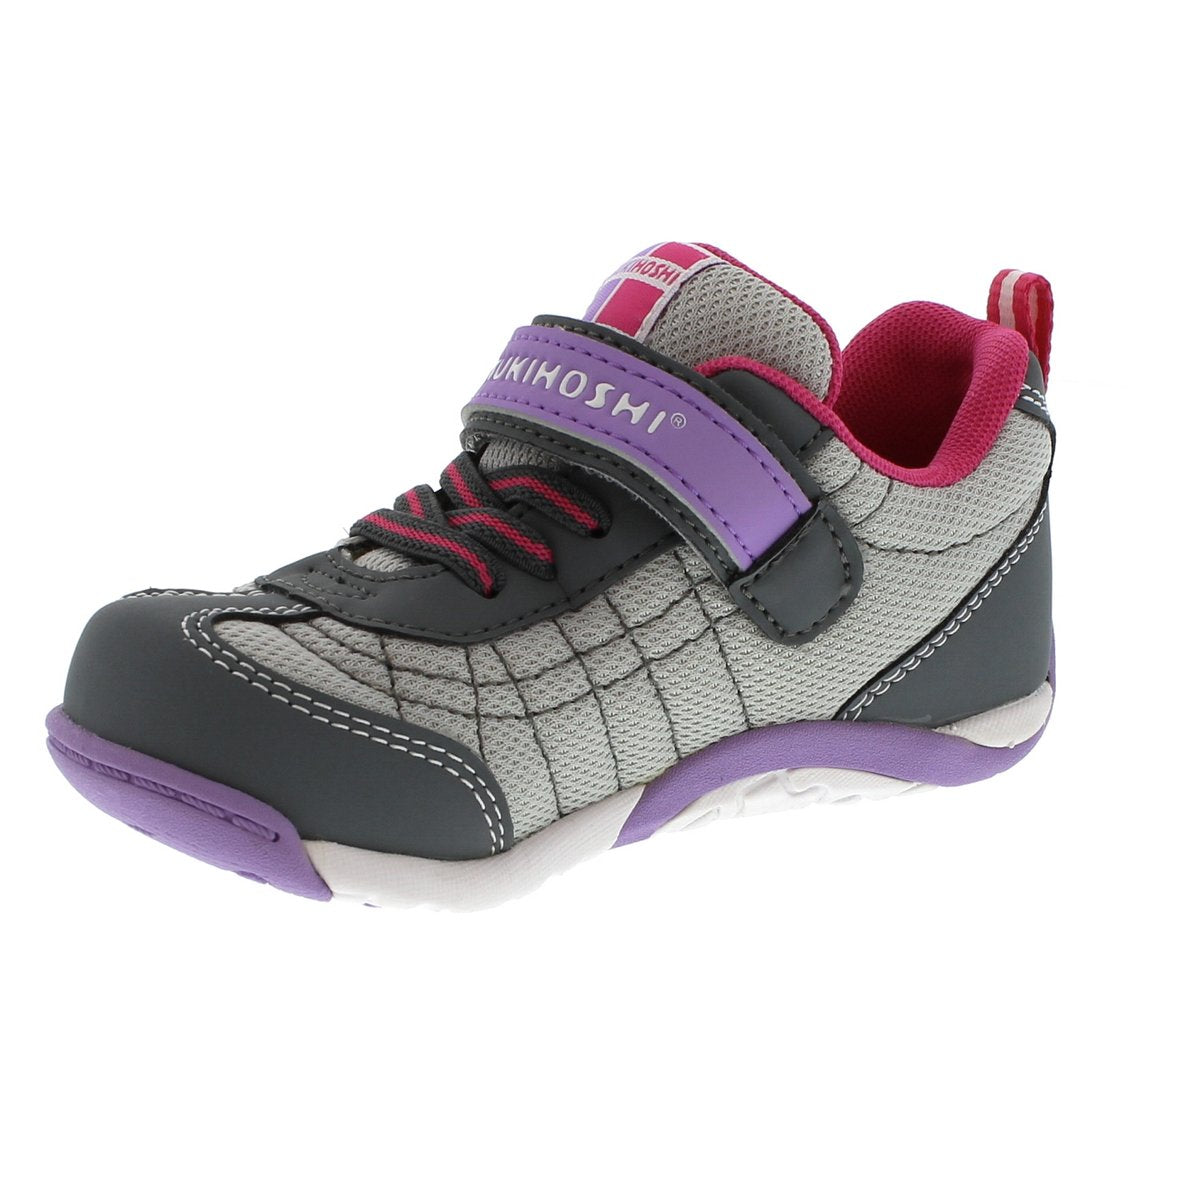 Child Tsukihoshi Kaz Sneaker in Gray/Purple from the front view